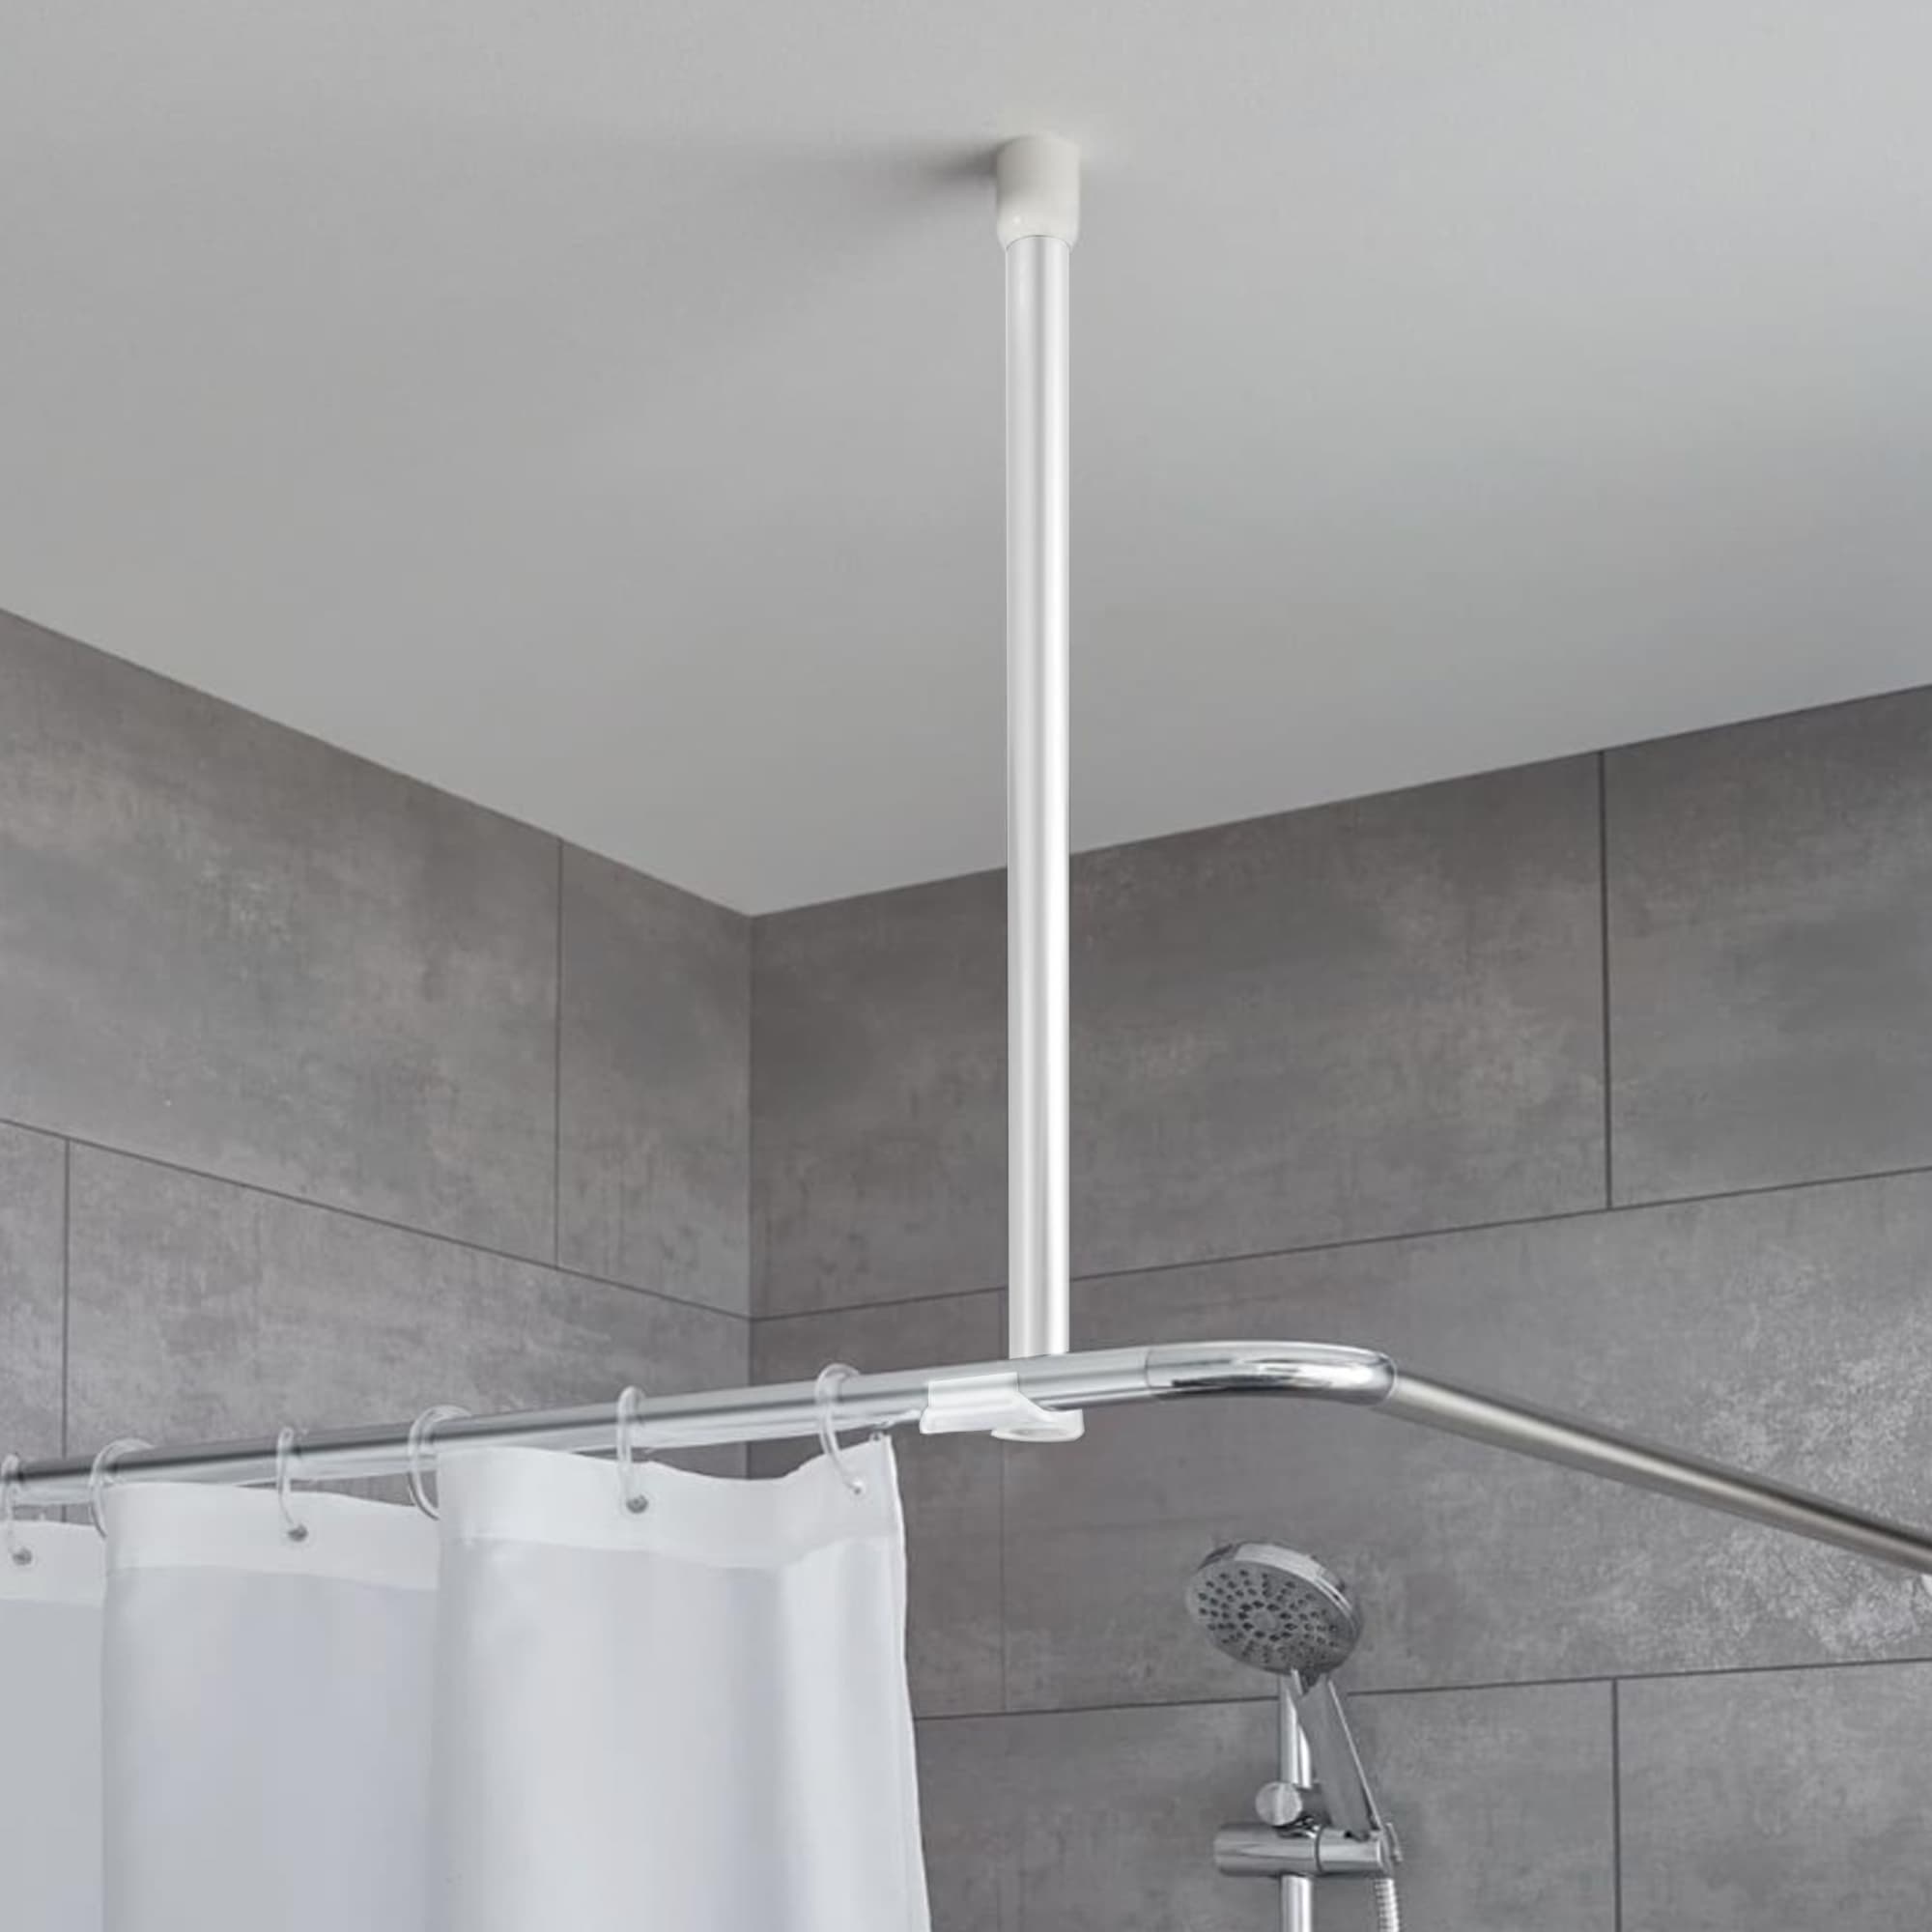 White ceiling support rod in a modern bathroom, enhancing the stability of the shower curtain rail